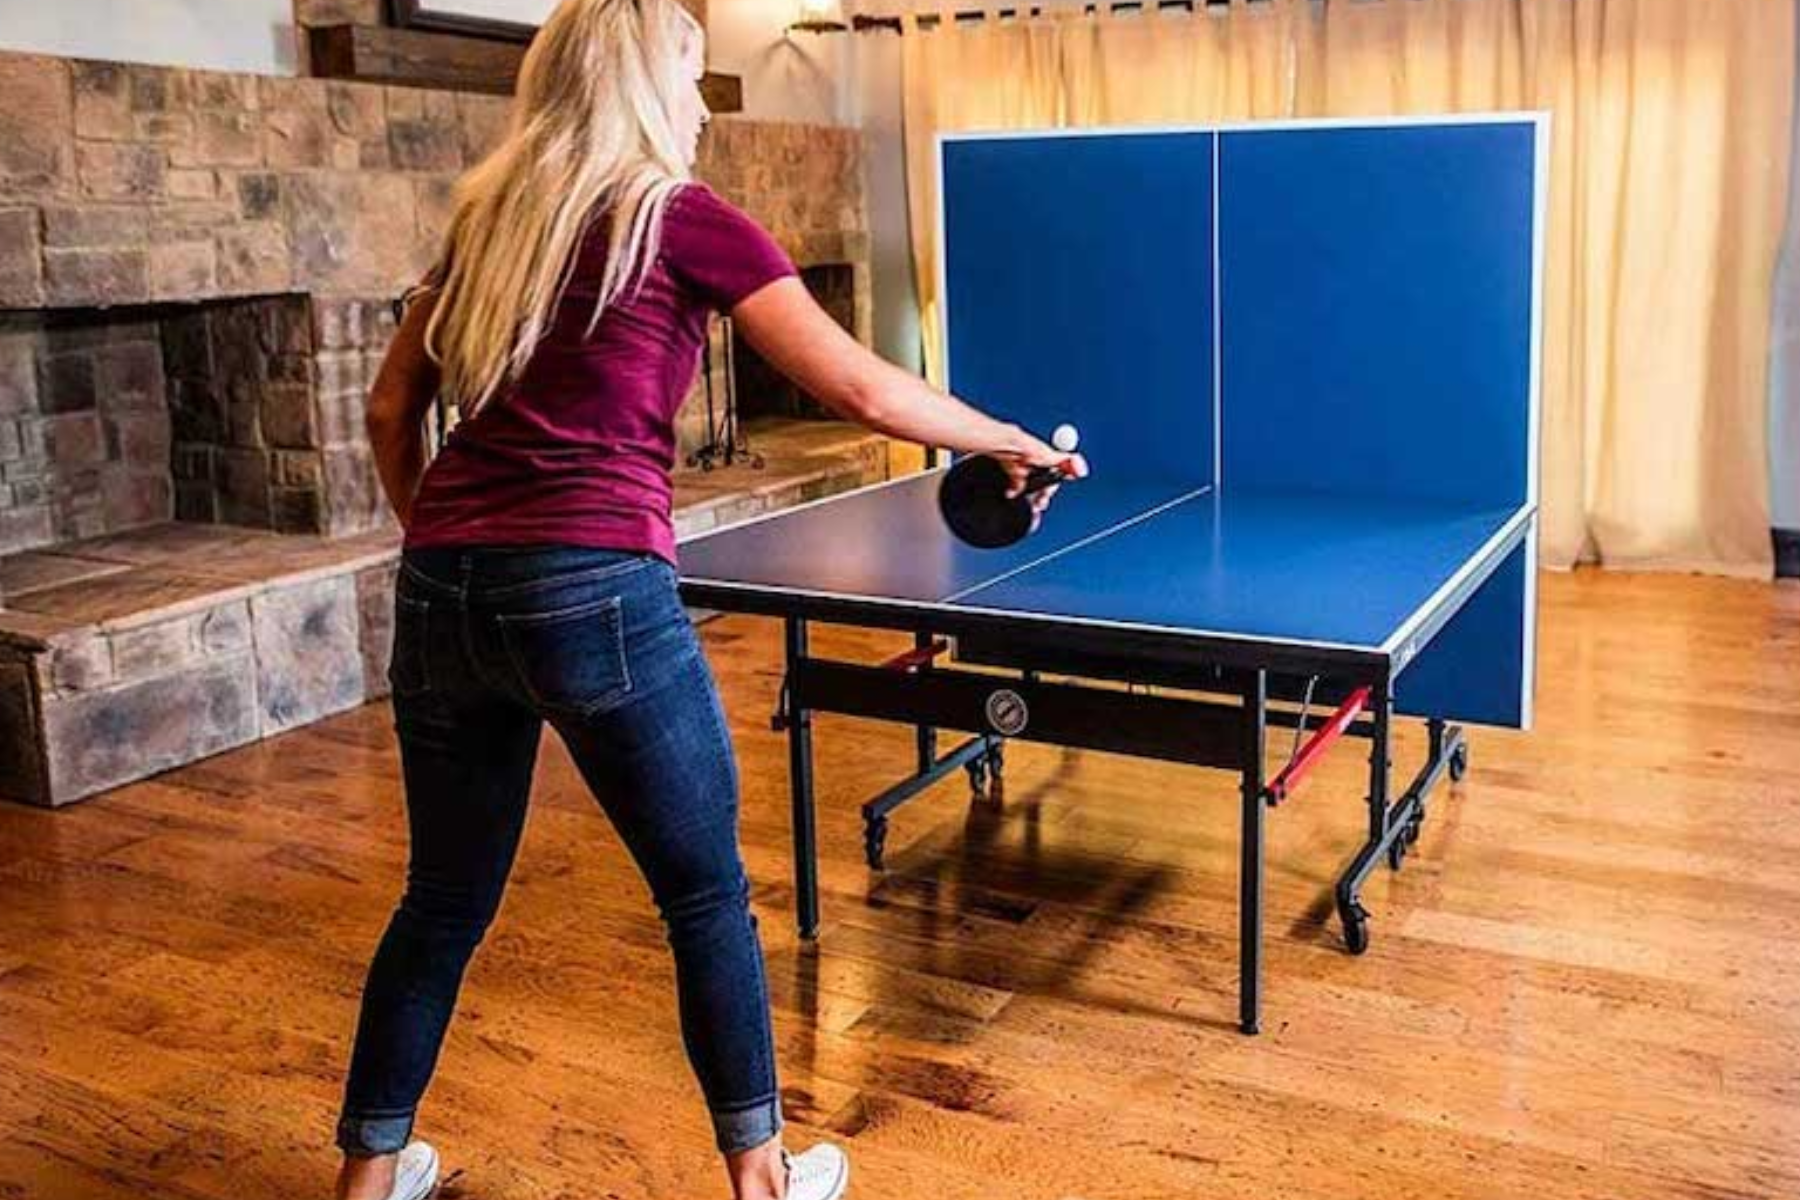 A solo female player engaged in a game of ping-pong